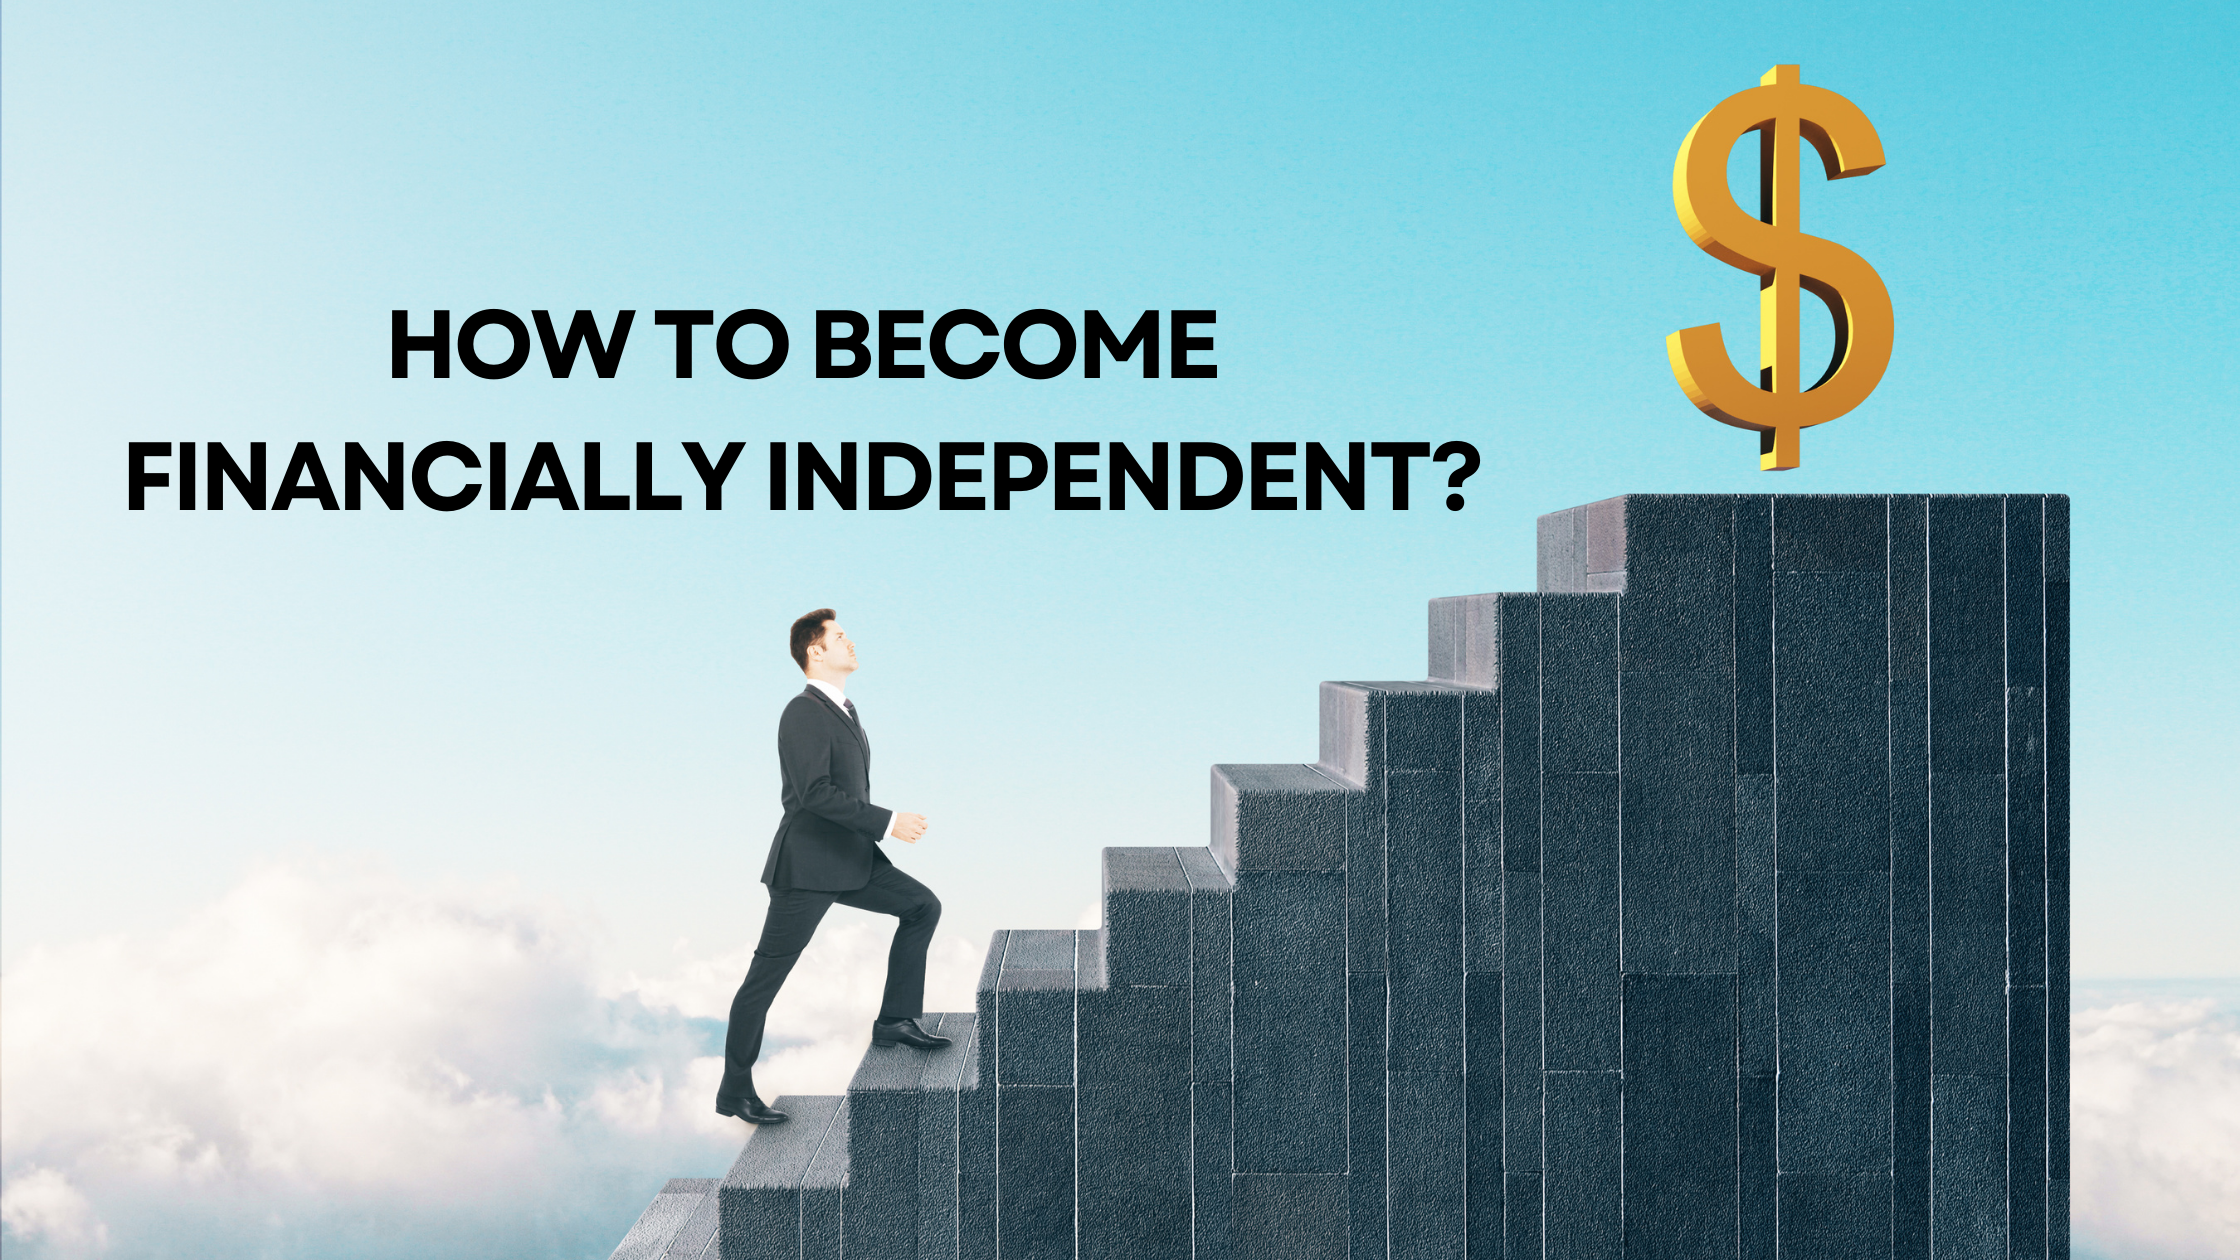 How to Become Financially Independent